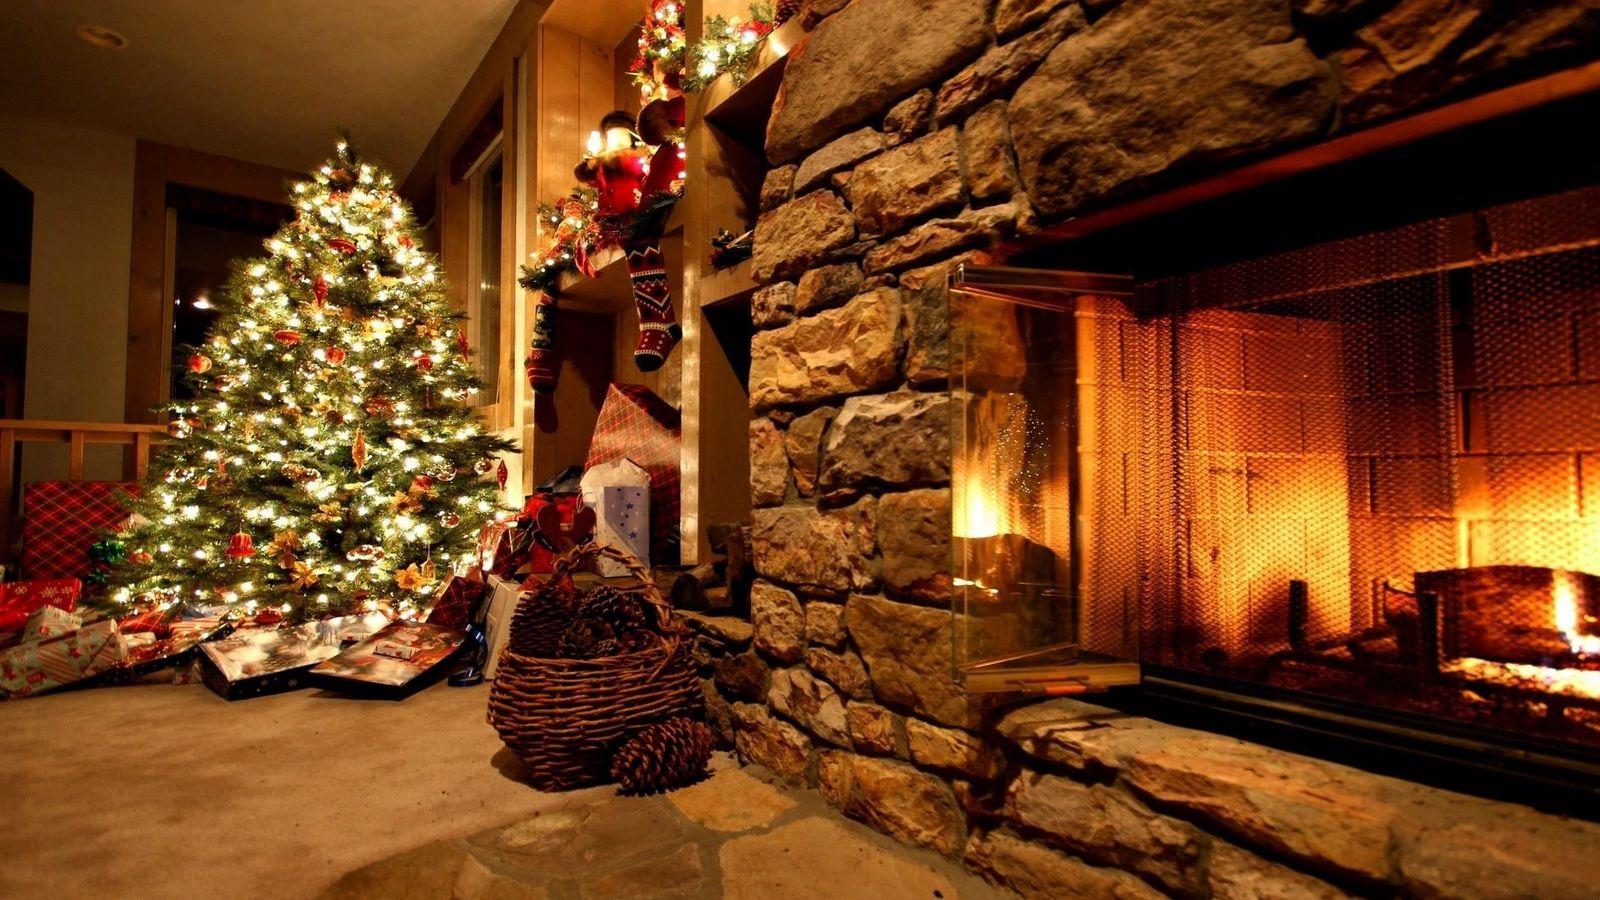 Download wallpaper 1600x900 christmas tree, ornaments, fireplace